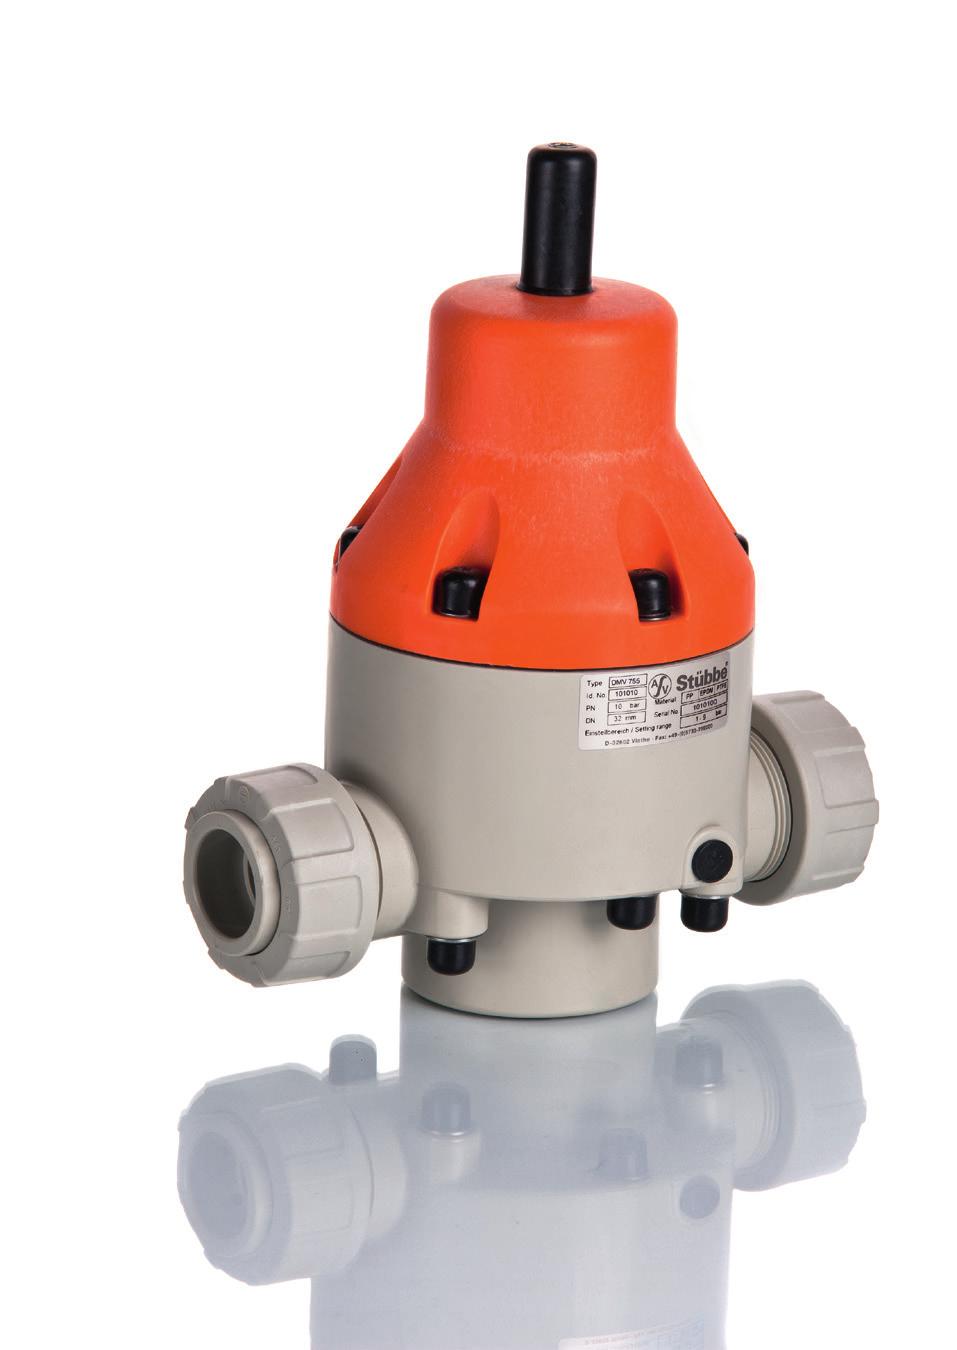 Pressure Reducing Valve DMV 755 Nominal size DN 10 50 Nominal size 3/8 2 Nominal pressure PN 10 bar Features pressure setting range 1 to 9 bar control valve for reliable reduction of system pressures